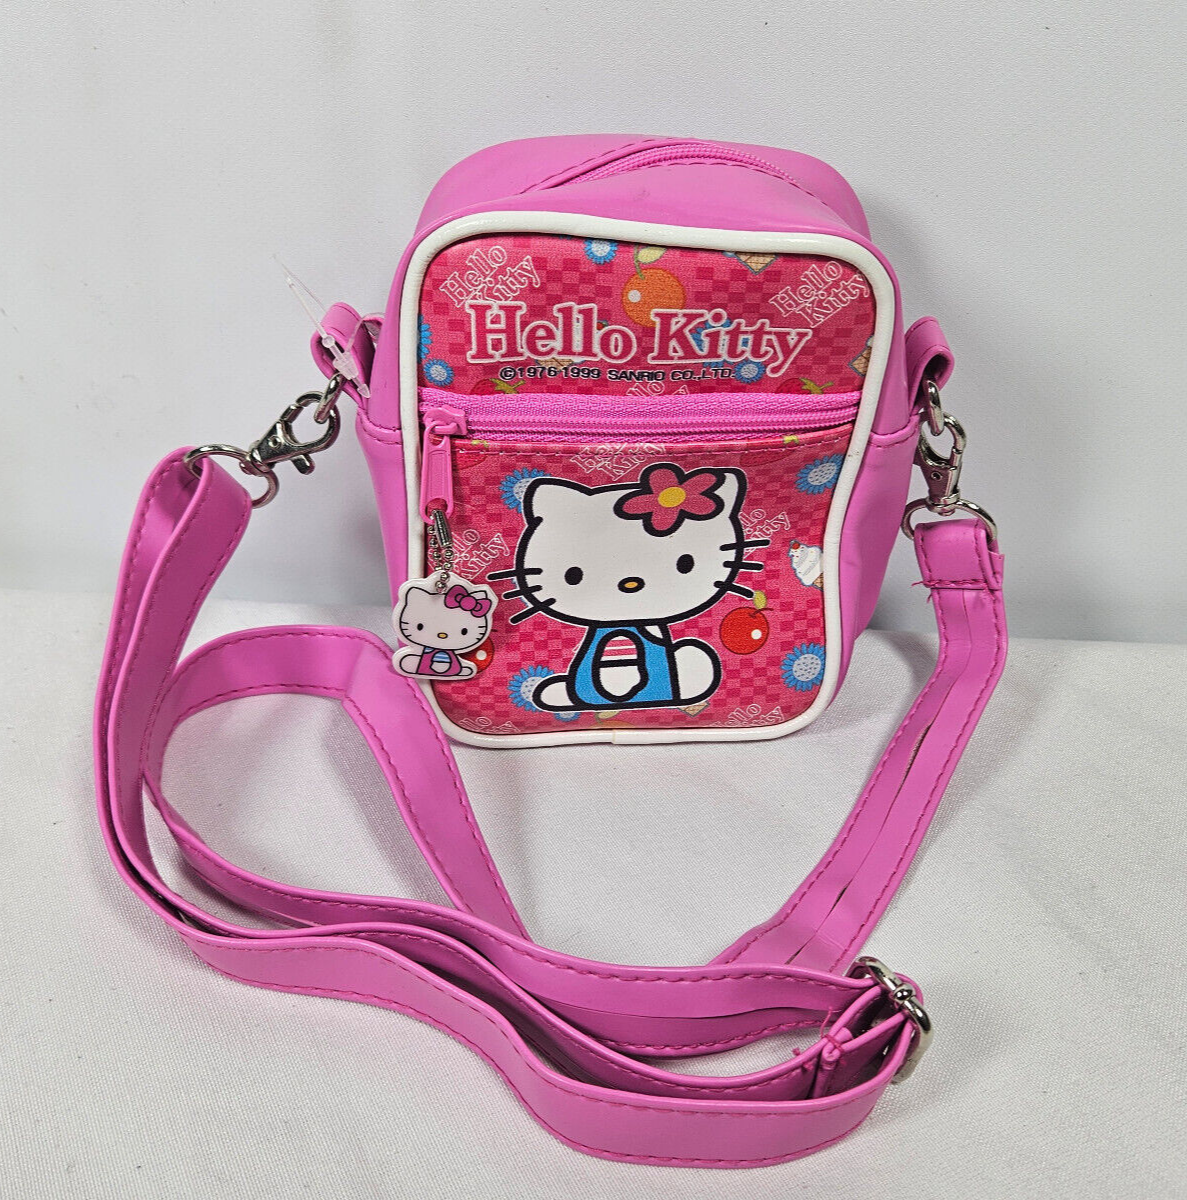 Primary image for Vintage Hello Kitty 5.5" Miniature Pink Bag Shoulder Strap 1999 Sanrio